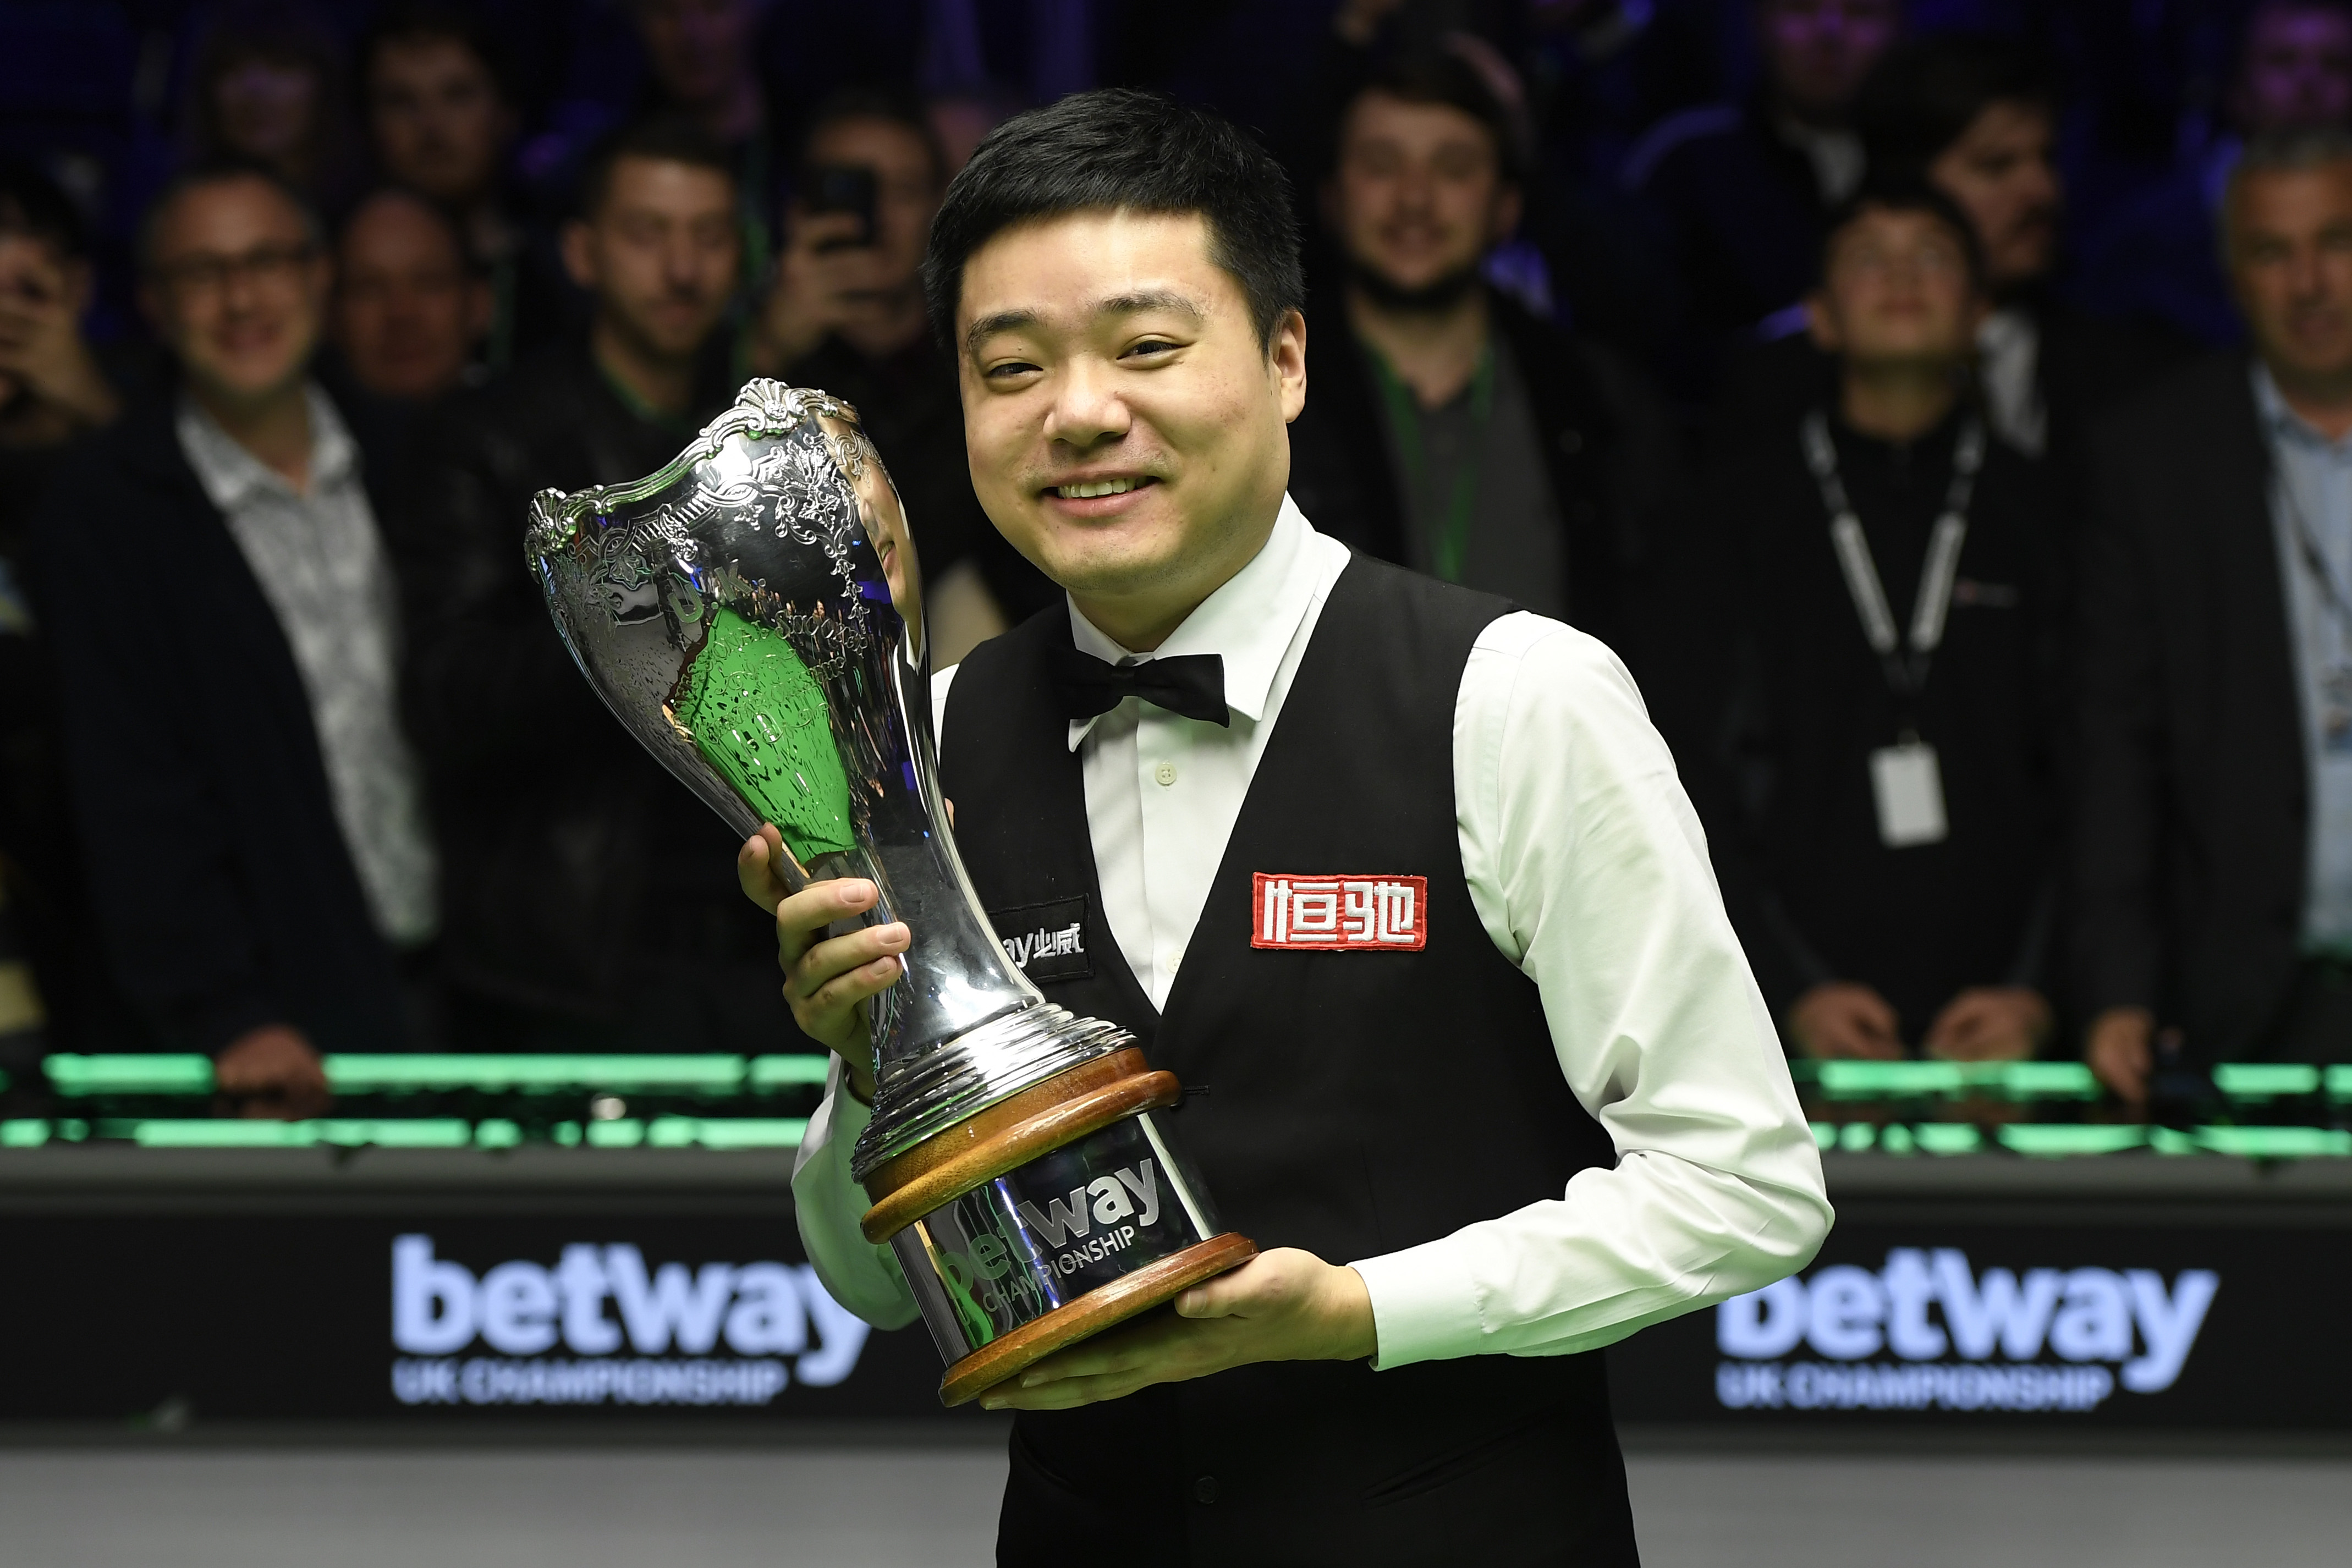 UK Championship Snooker 2022 TV channel, schedule and tickets